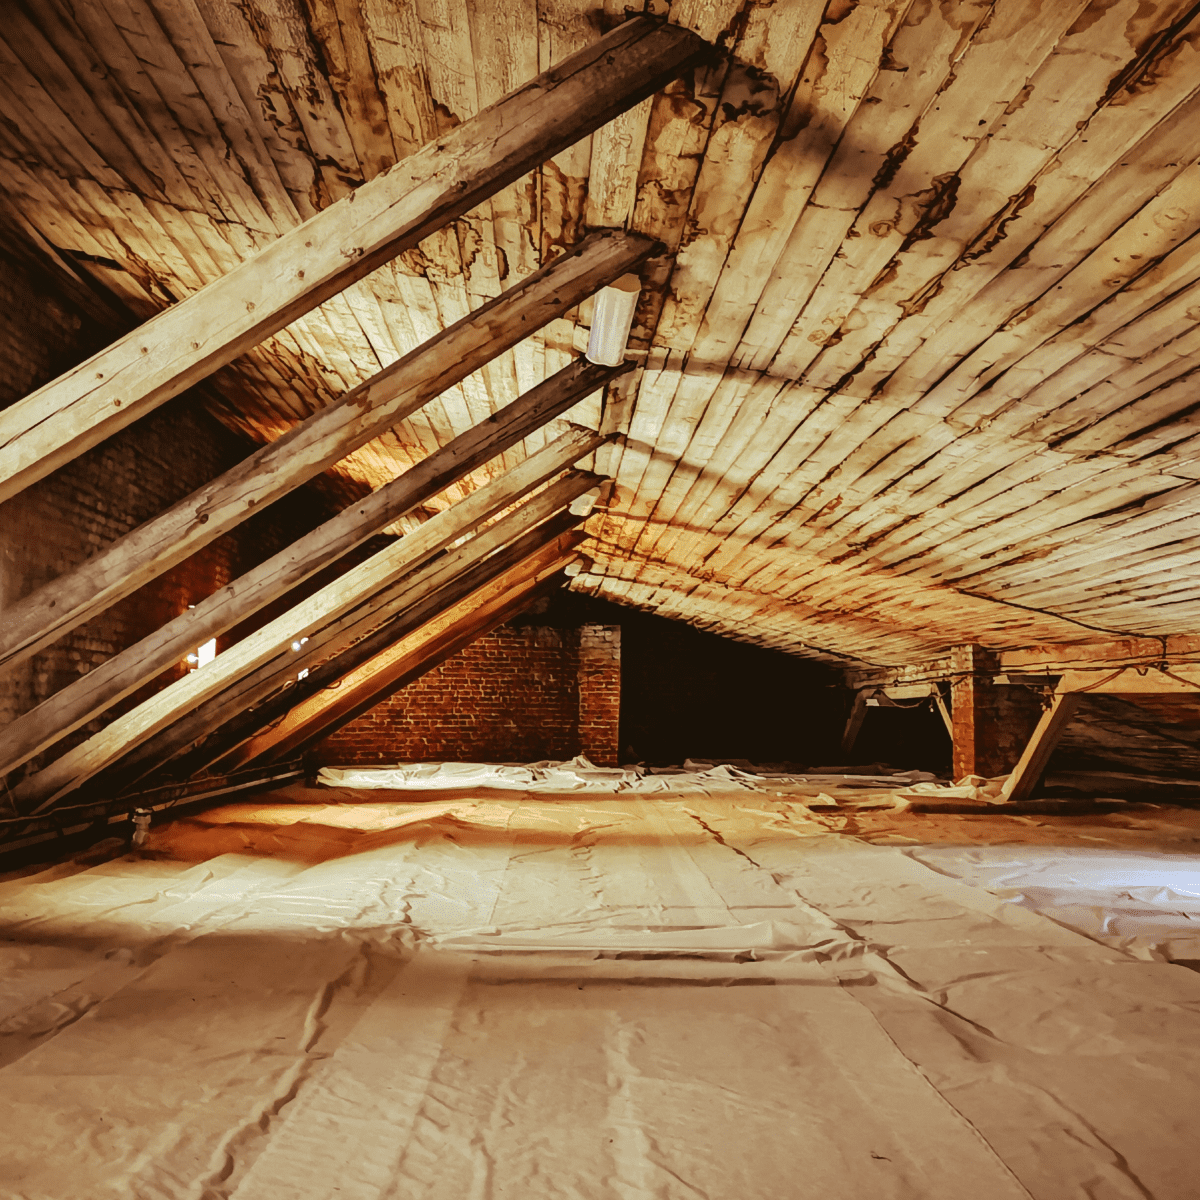 How To Prevent Attic Mold From Growing